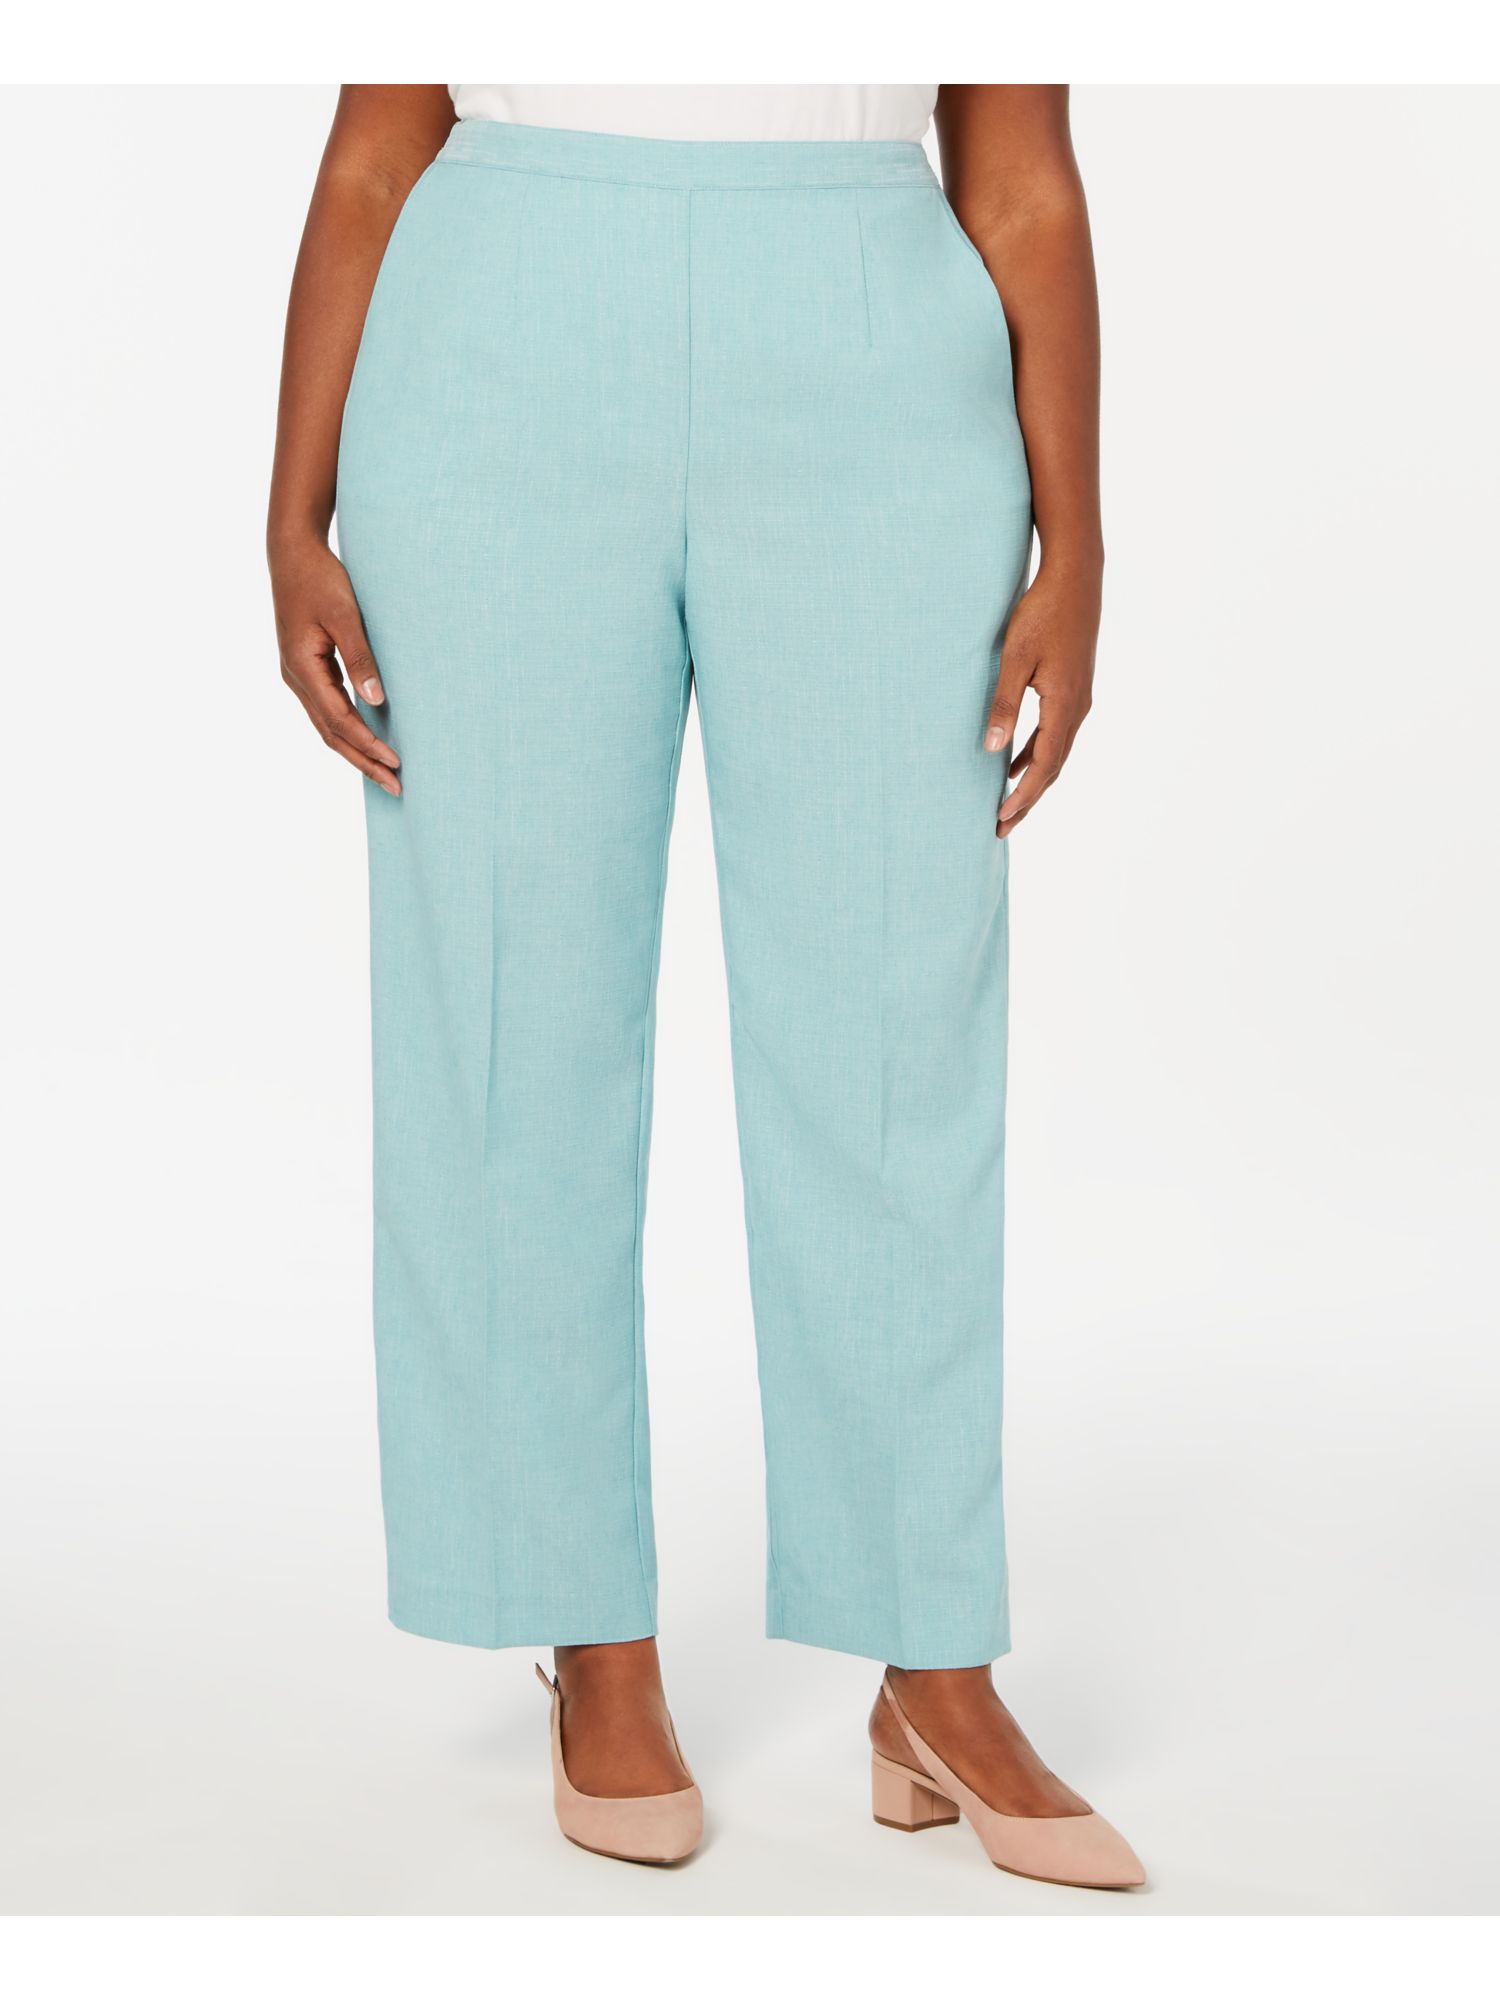 ALFRED DUNNER Womens Turquoise Straight leg Pants Plus Size: 18W